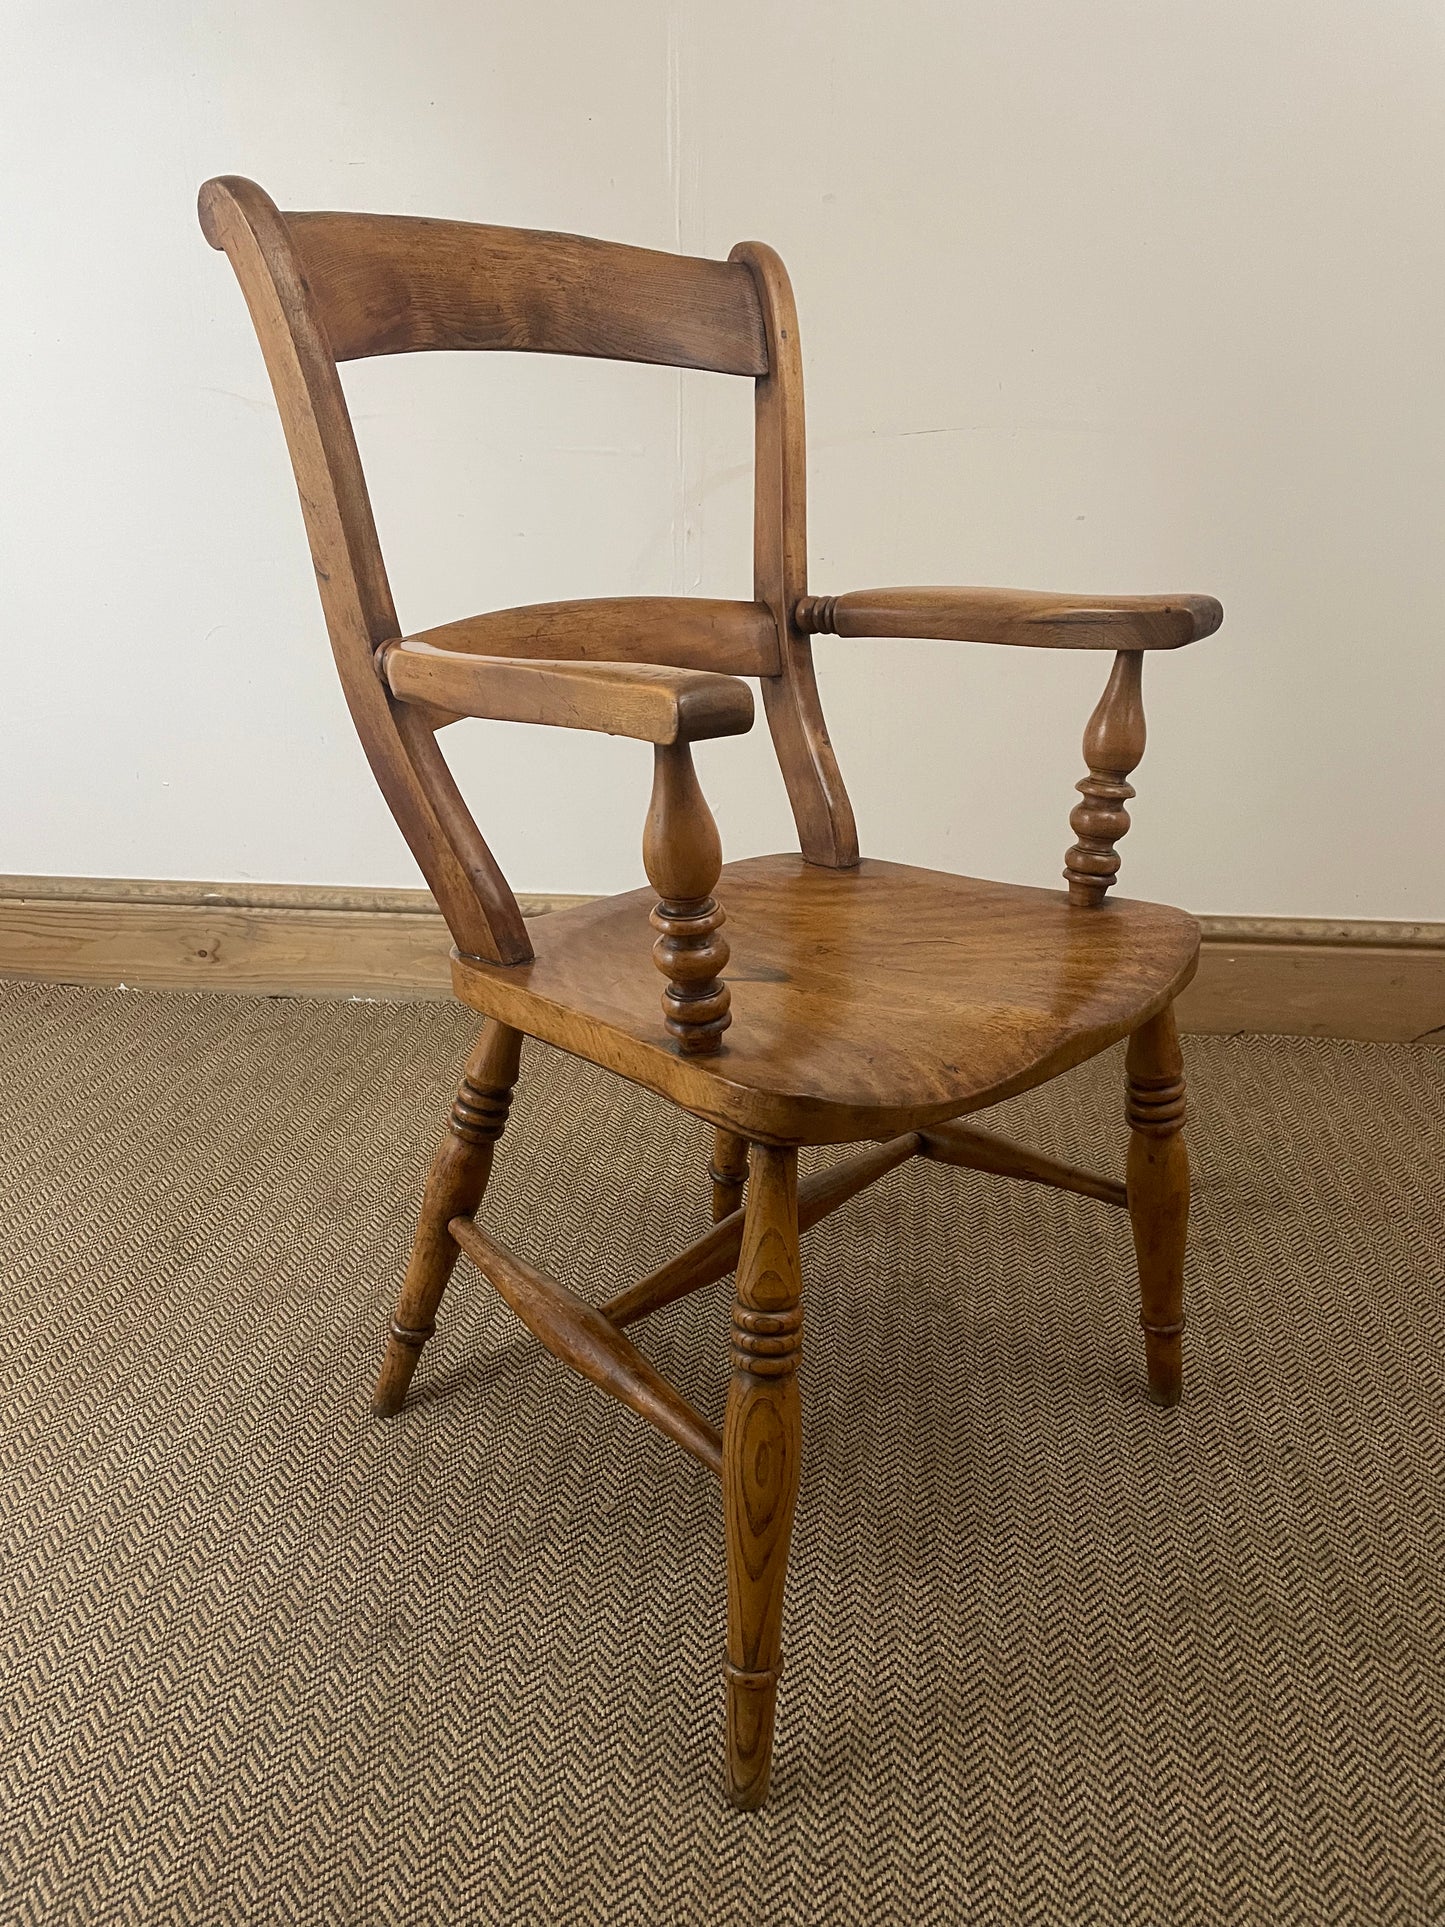 Discover Elegance & Comfort: The Victorian Antique Oxford Fruitwood Arm Chair